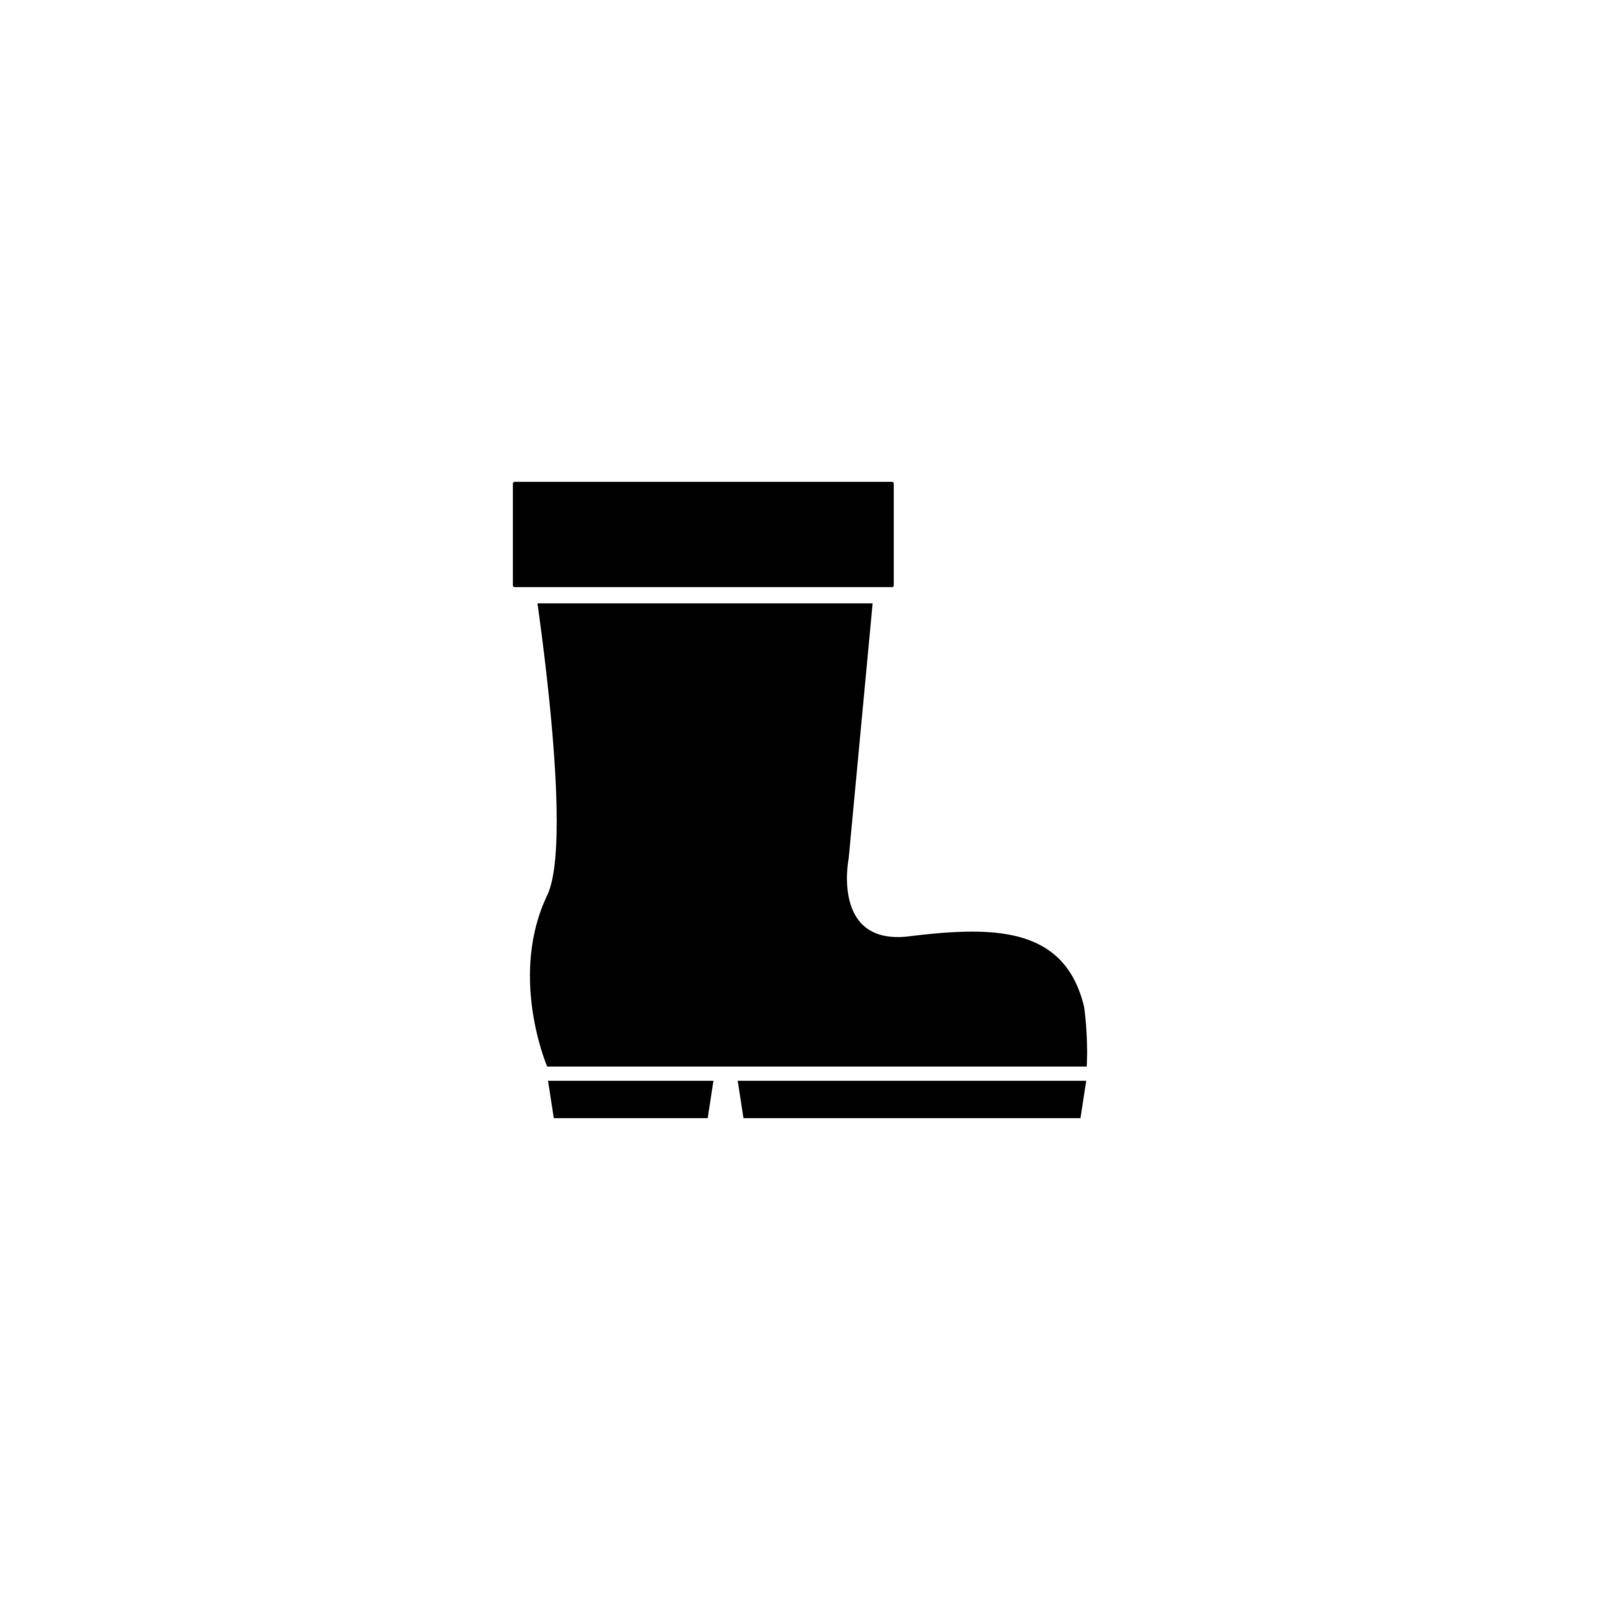 Wellington Boot, Rubber Shoe Footwear. Flat Vector Icon illustration. Simple black symbol on white background. Wellington Boot, Rubber Shoe Footwear sign design template for web and mobile UI element